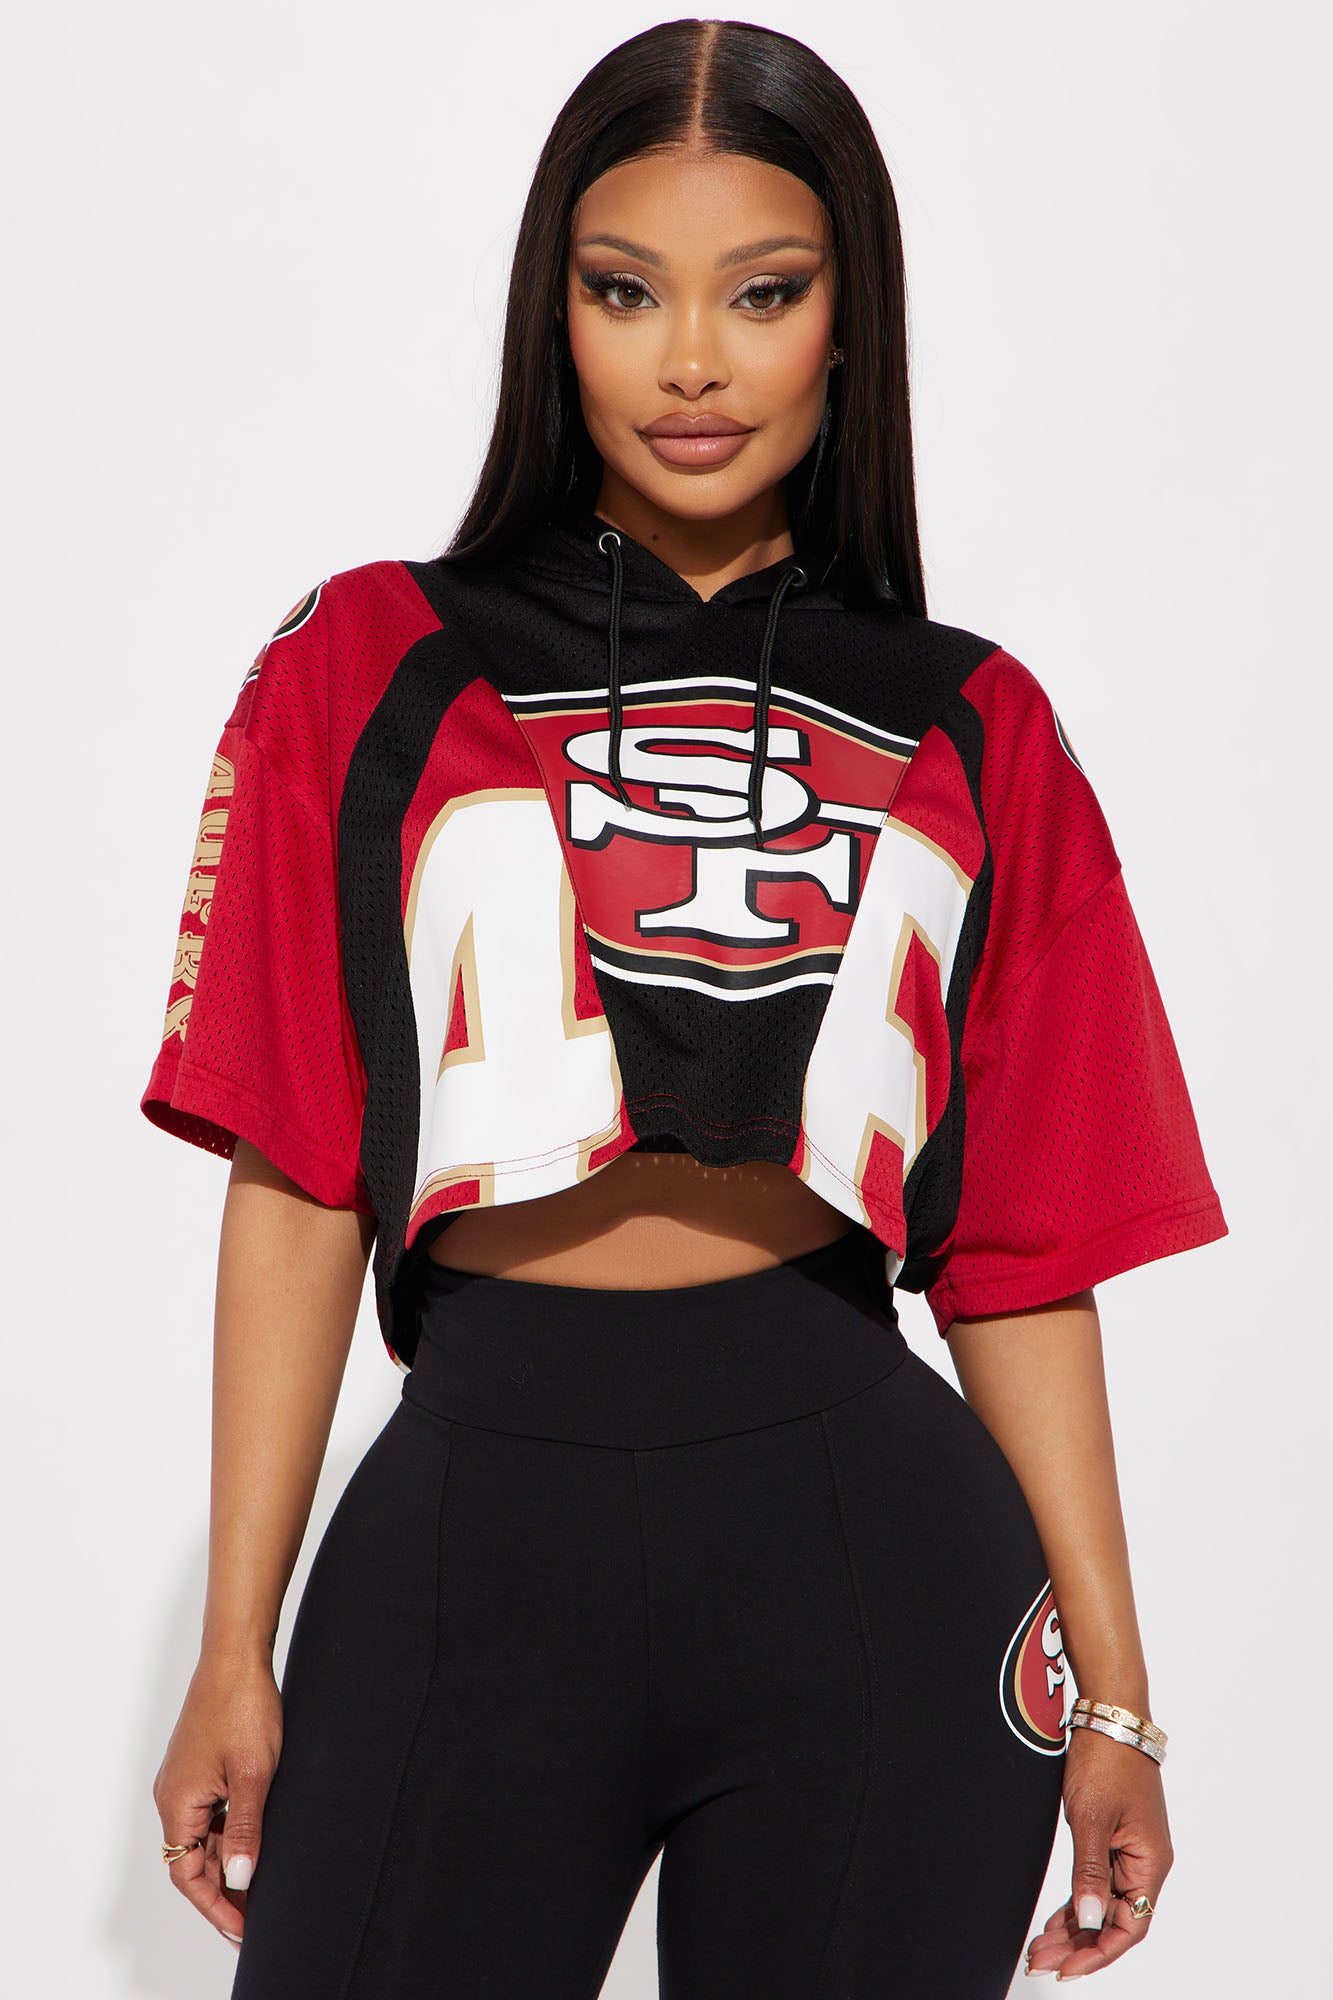 49ers Cropped Mesh Top - Red  Fashion Nova, Screens Tops and